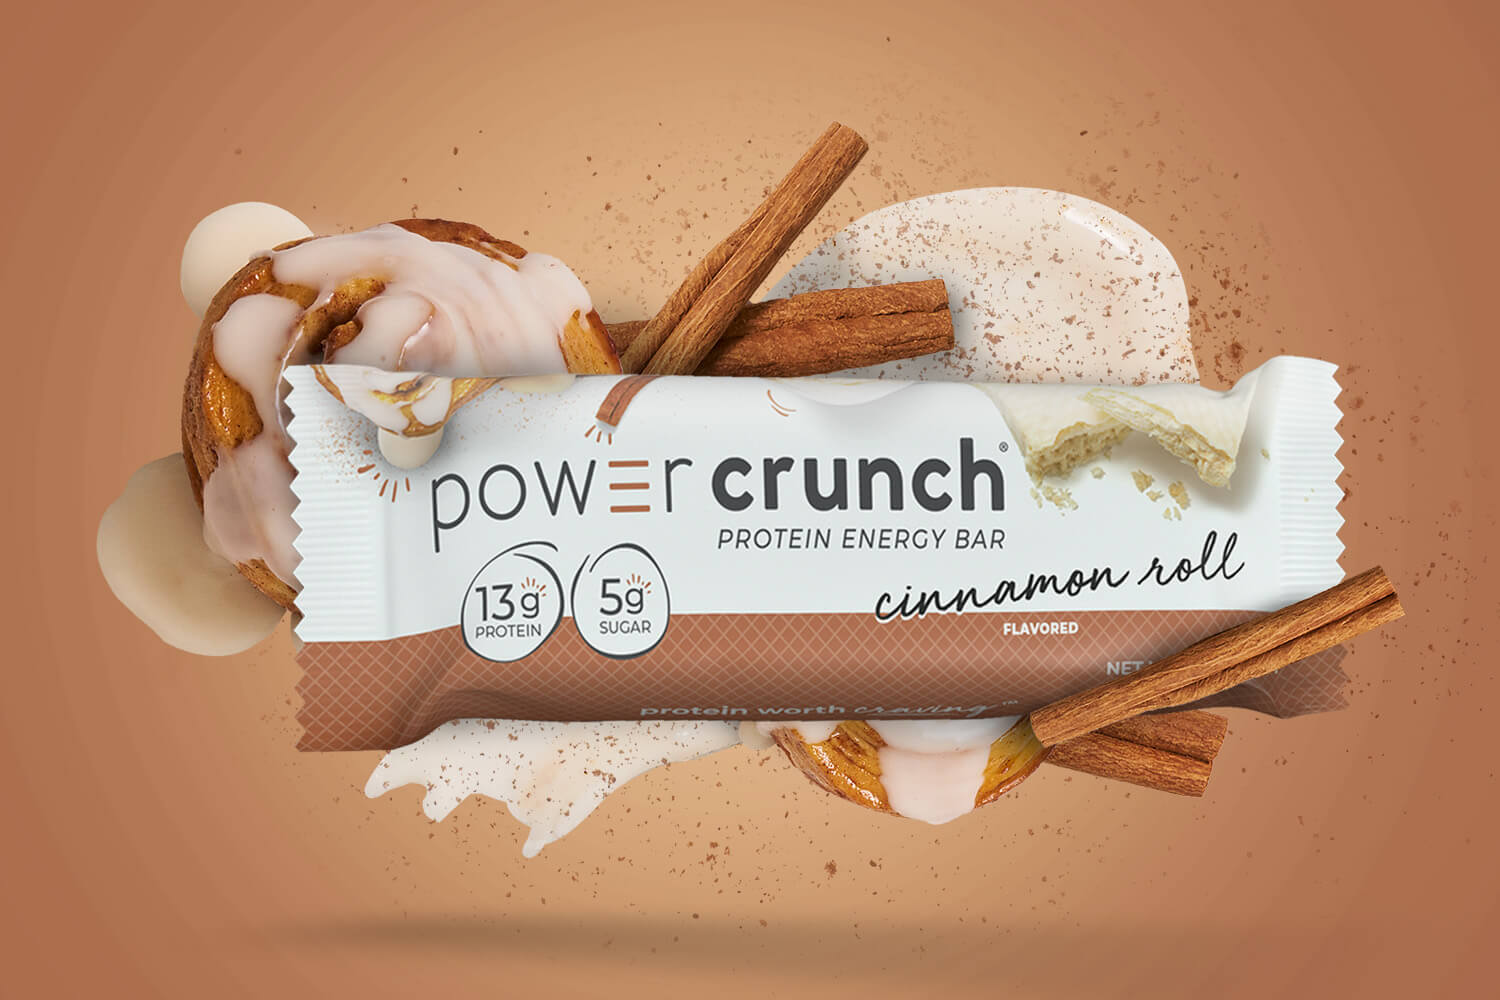 cinnamon roll protein bars pictured with cinnamon flavor explosion